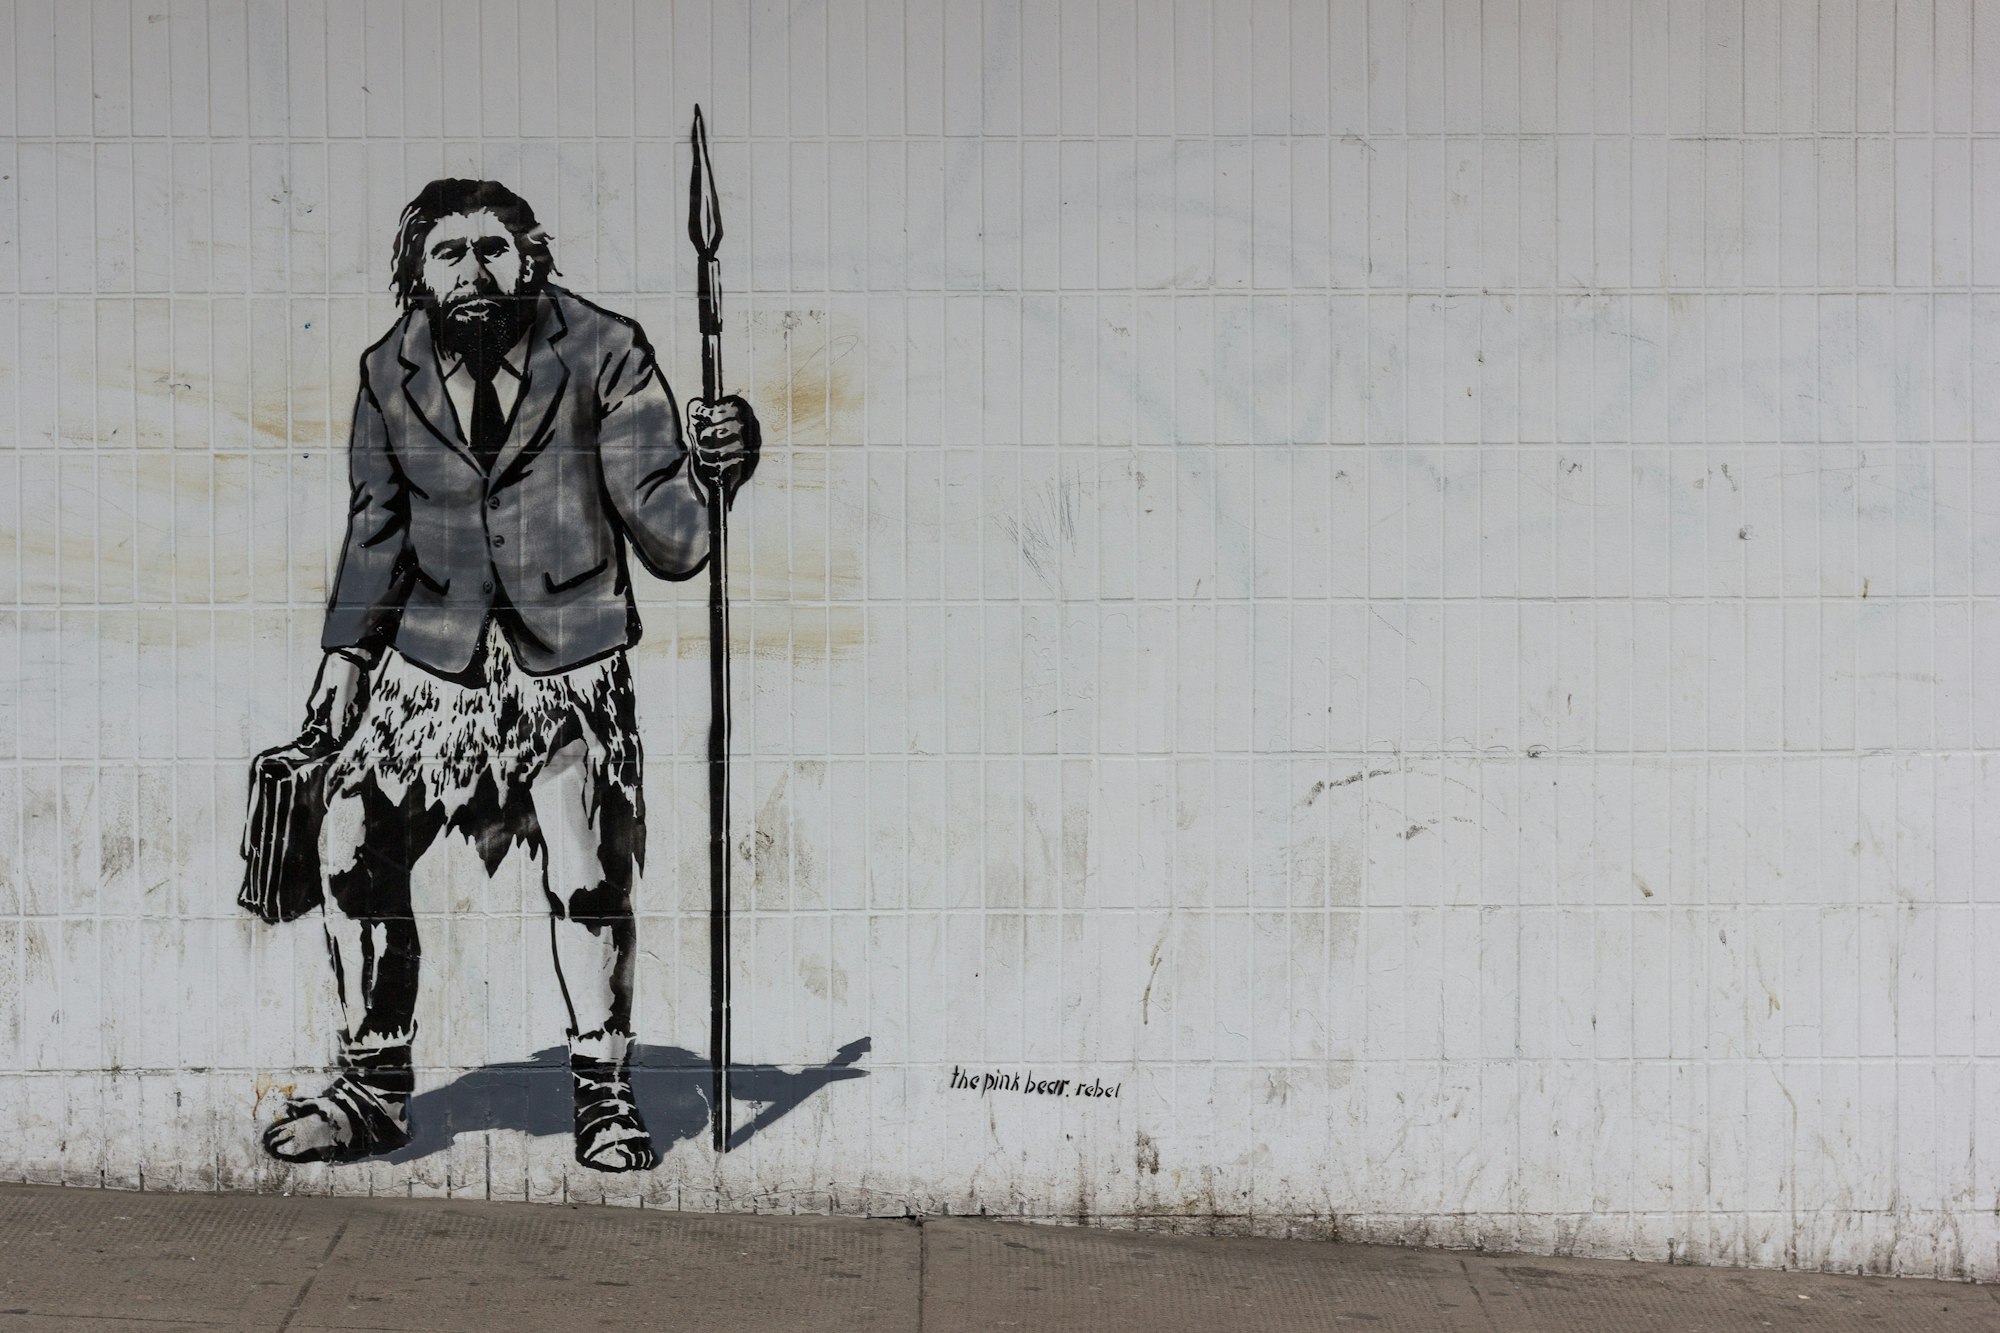 Lovely stencil work by thepinkbear.rebel street artist of a neanderthal man holding a briefcase in one hand and a spear in the other. Wearing a shirt, tie and suit jacket over an animal skin. Ready for a solid days work.